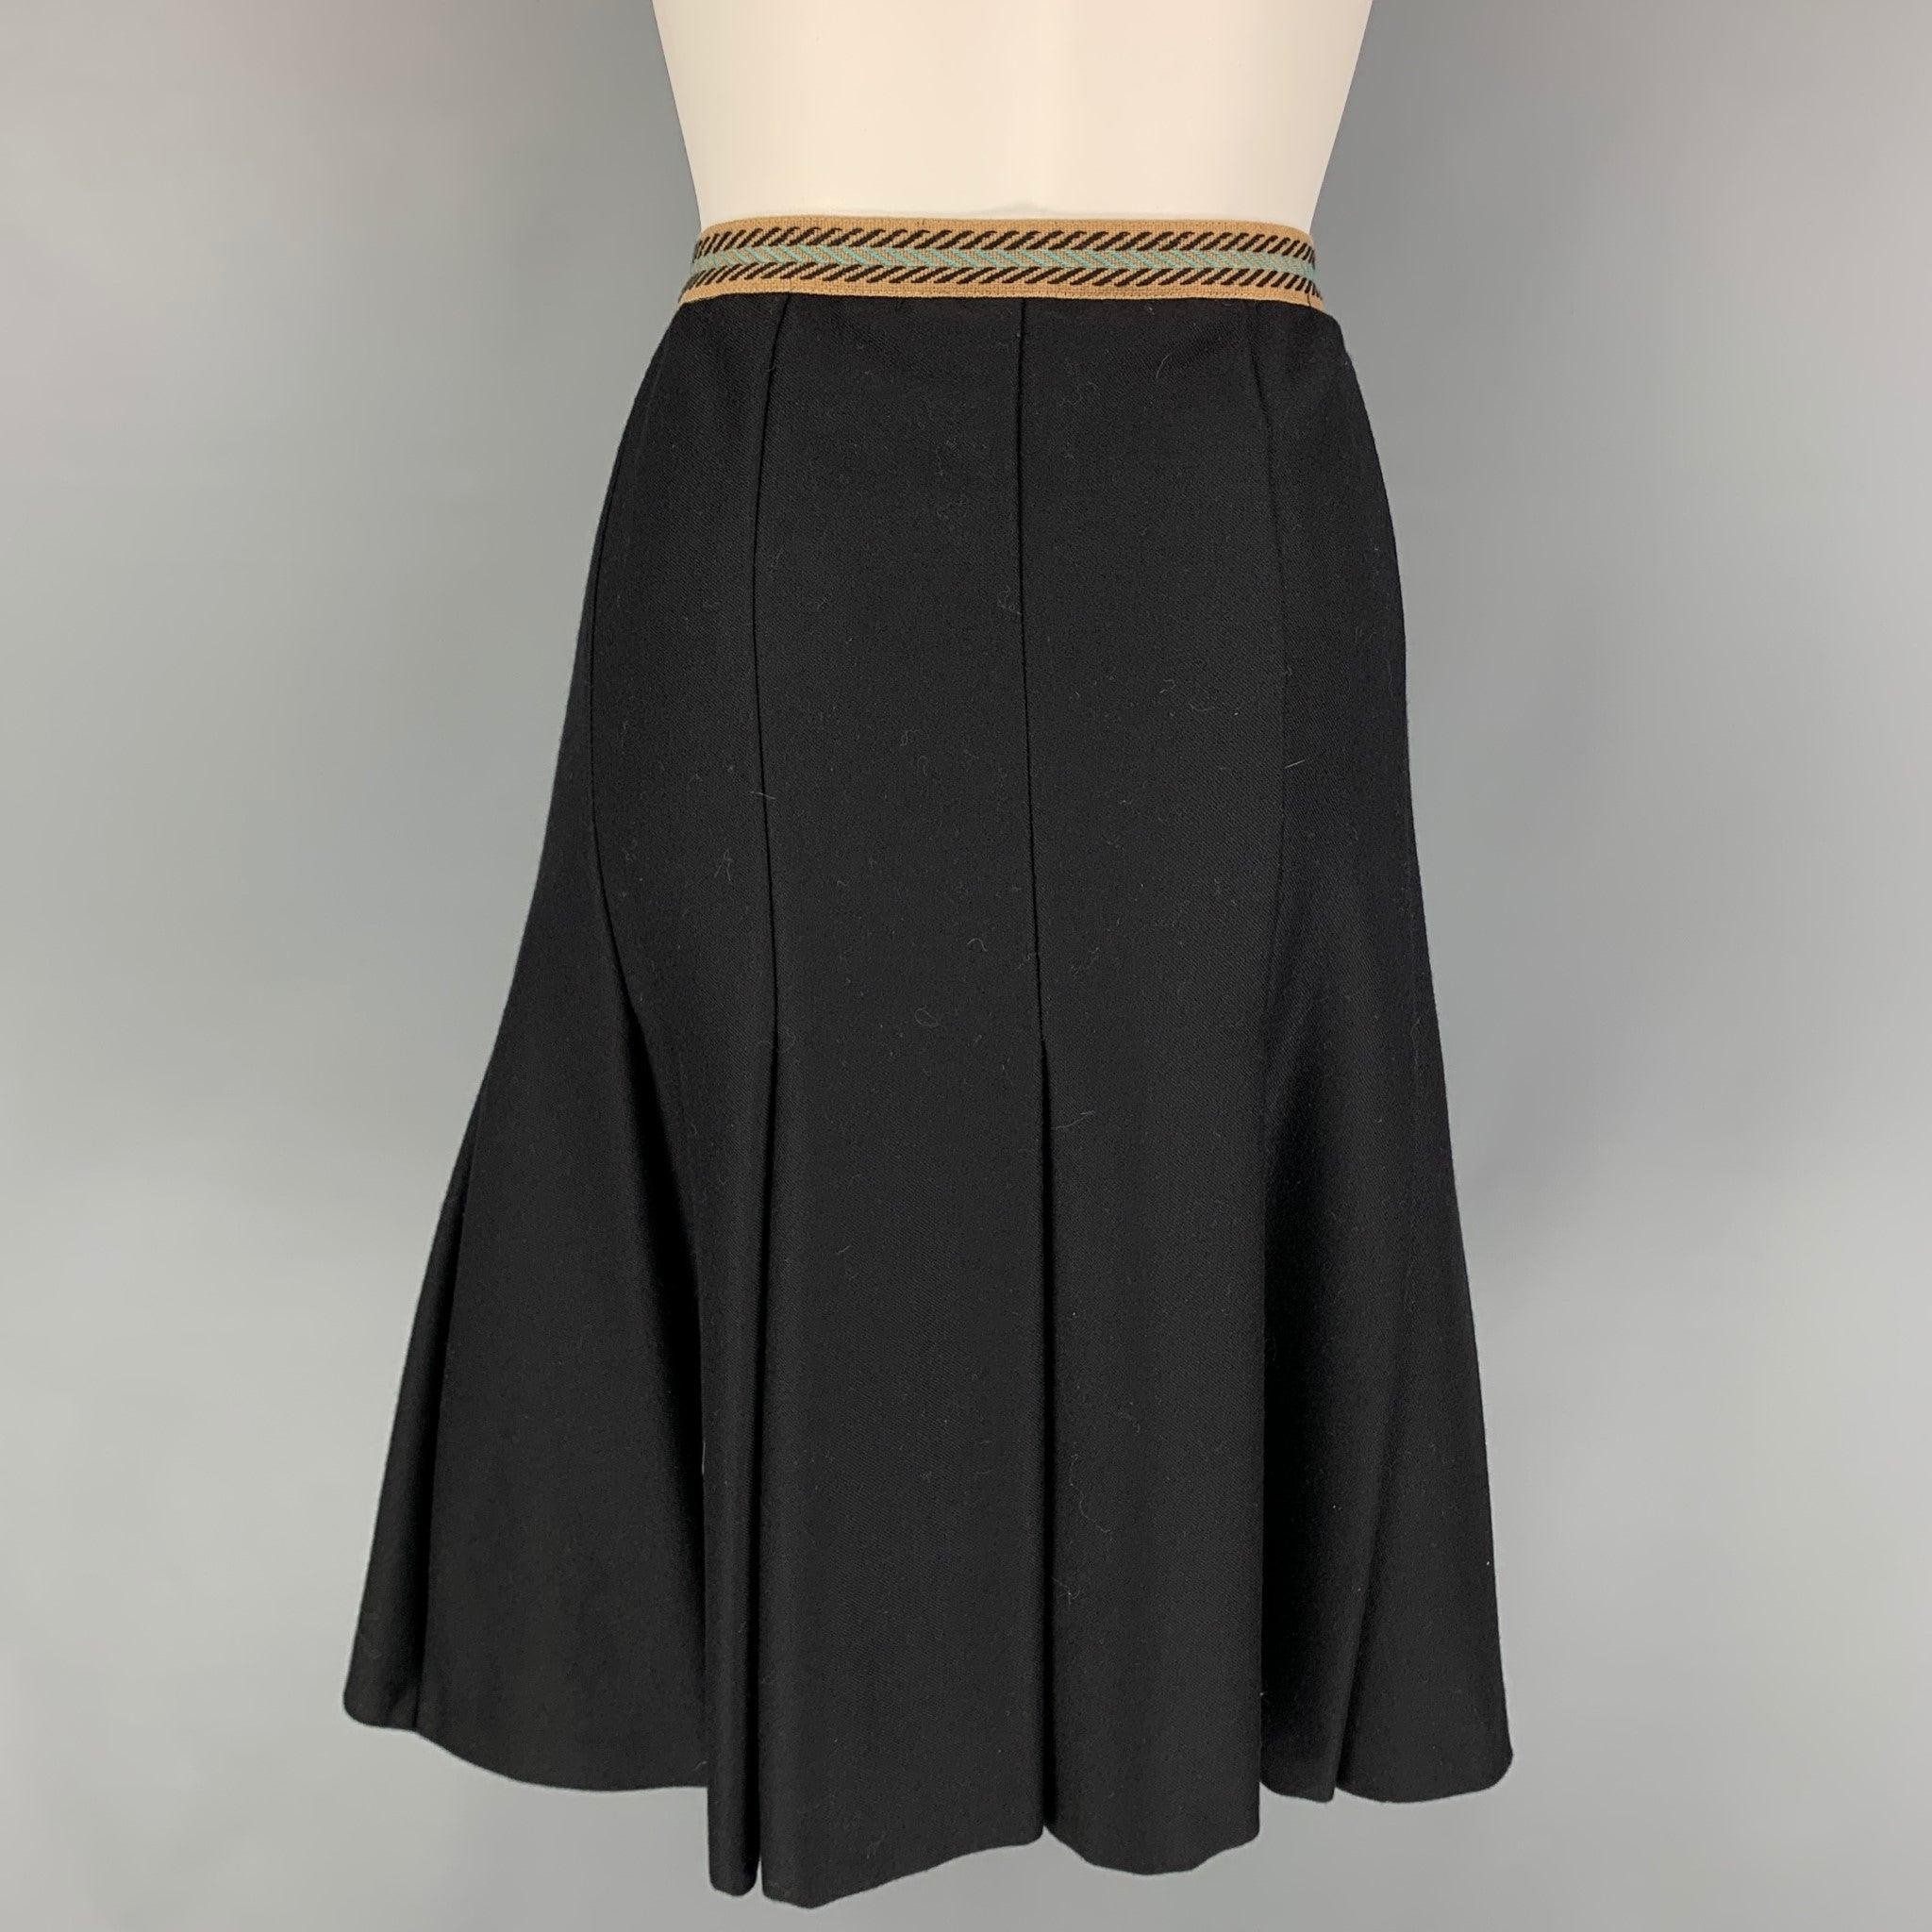 M MISSONI Size 10 Black Wool Pleated A-Line Skirt In Good Condition For Sale In San Francisco, CA